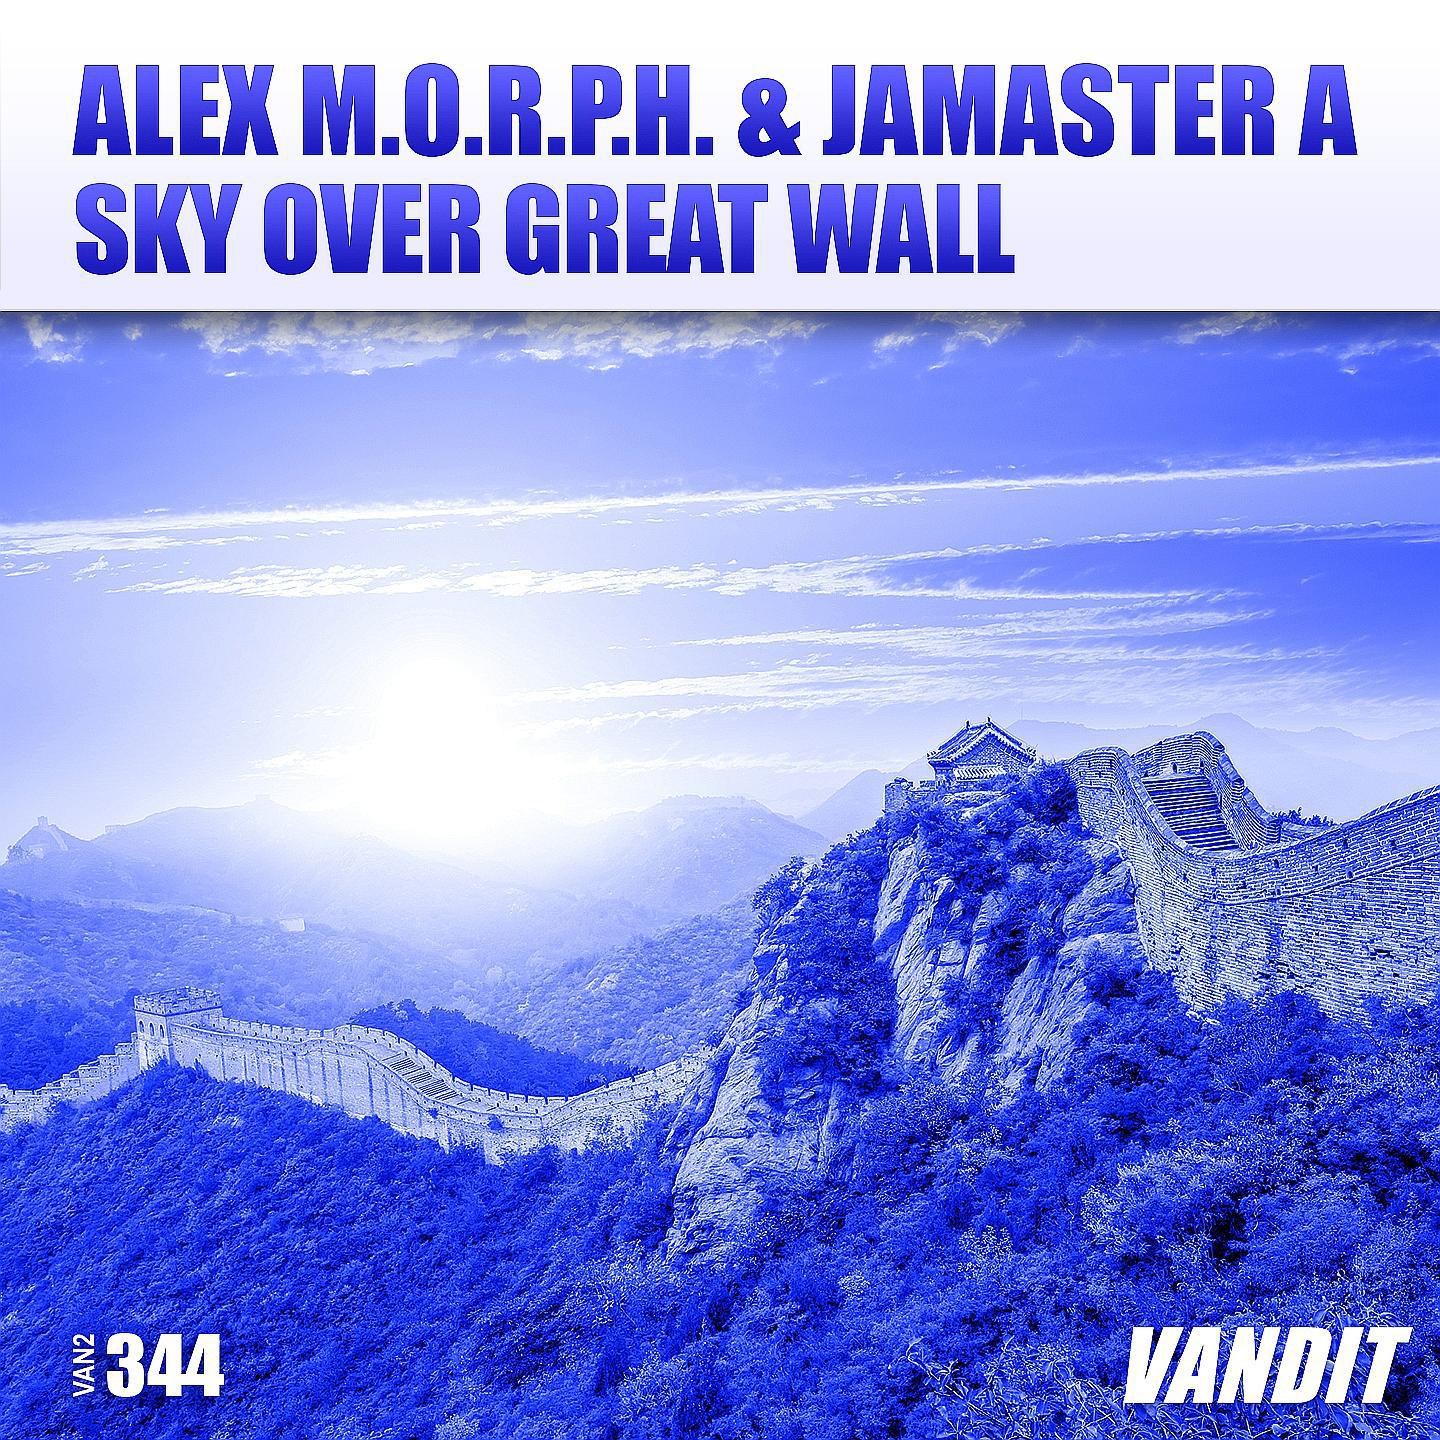 Alex M.O.R.P.H & Jamaster A -Sky Over Great Wall